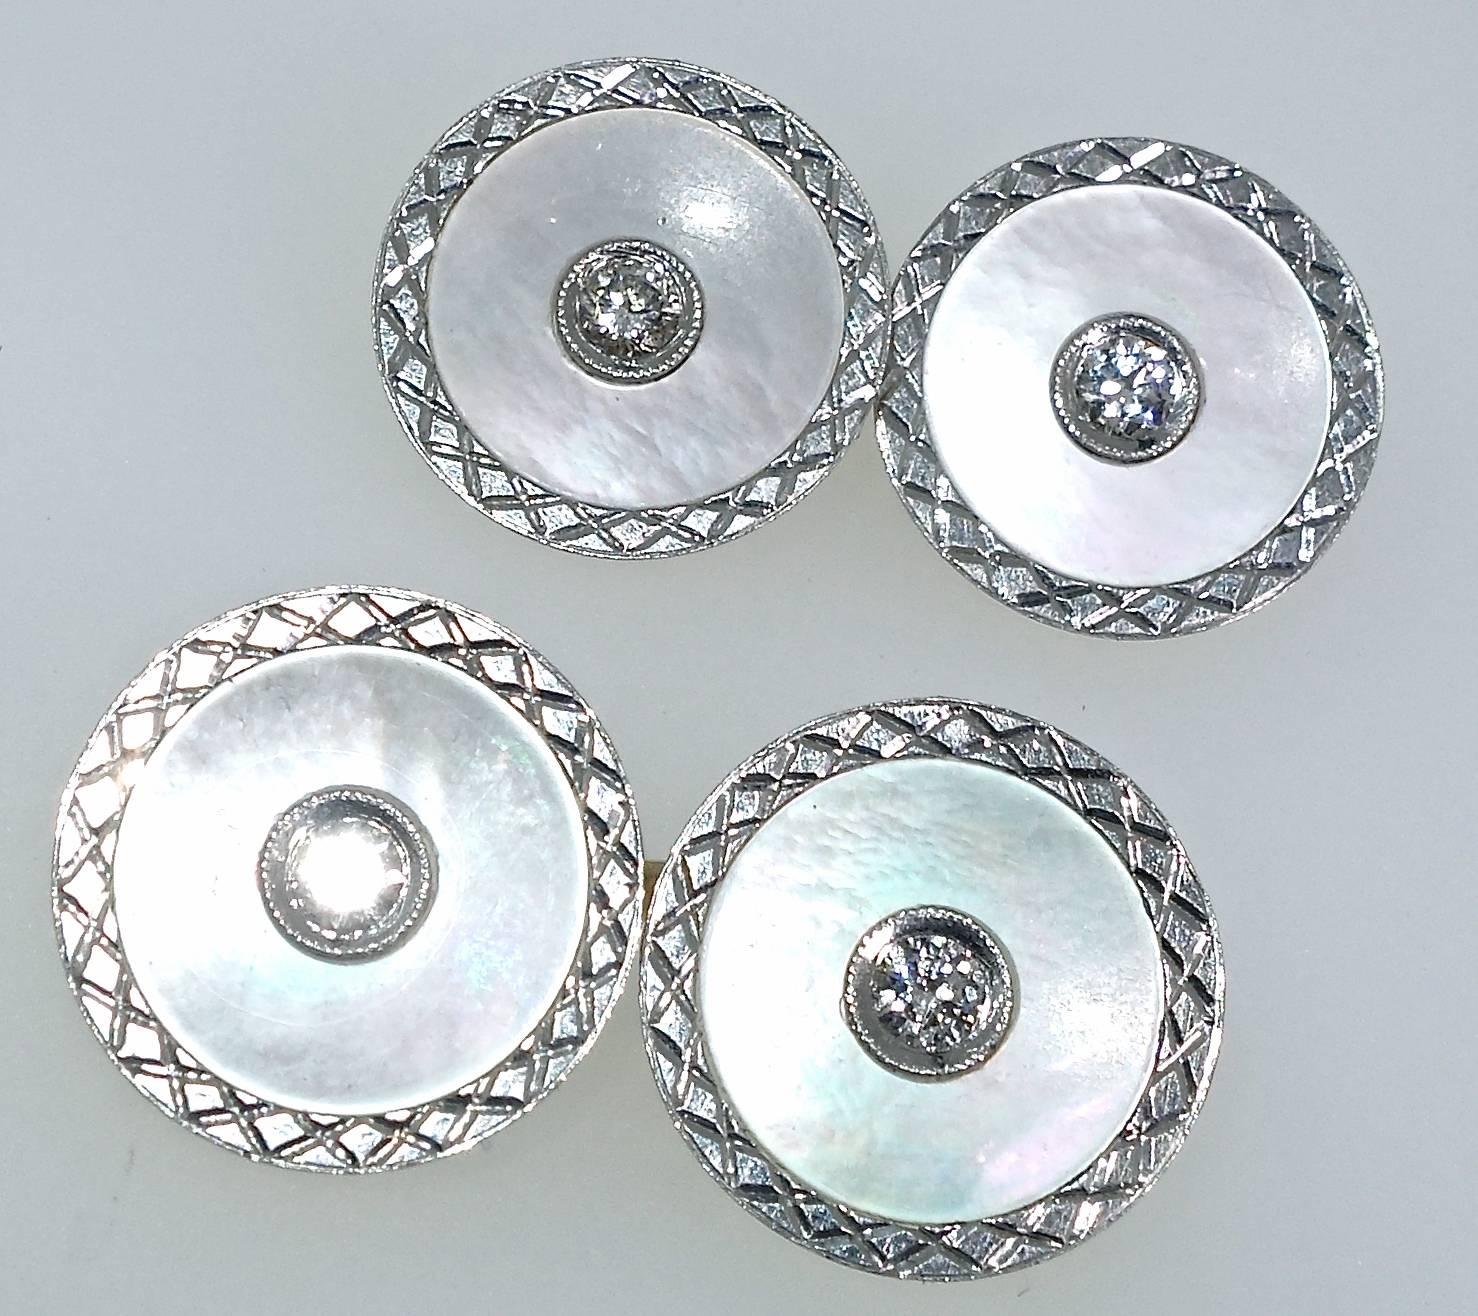 Art Deco platinum cufflinks with engraved edges surrounding white mother of pearl  and a bead set diamond in the center and backed with gold.  There are .33 cts. total weight of the white European cut diamonds.  Early Art Deco.